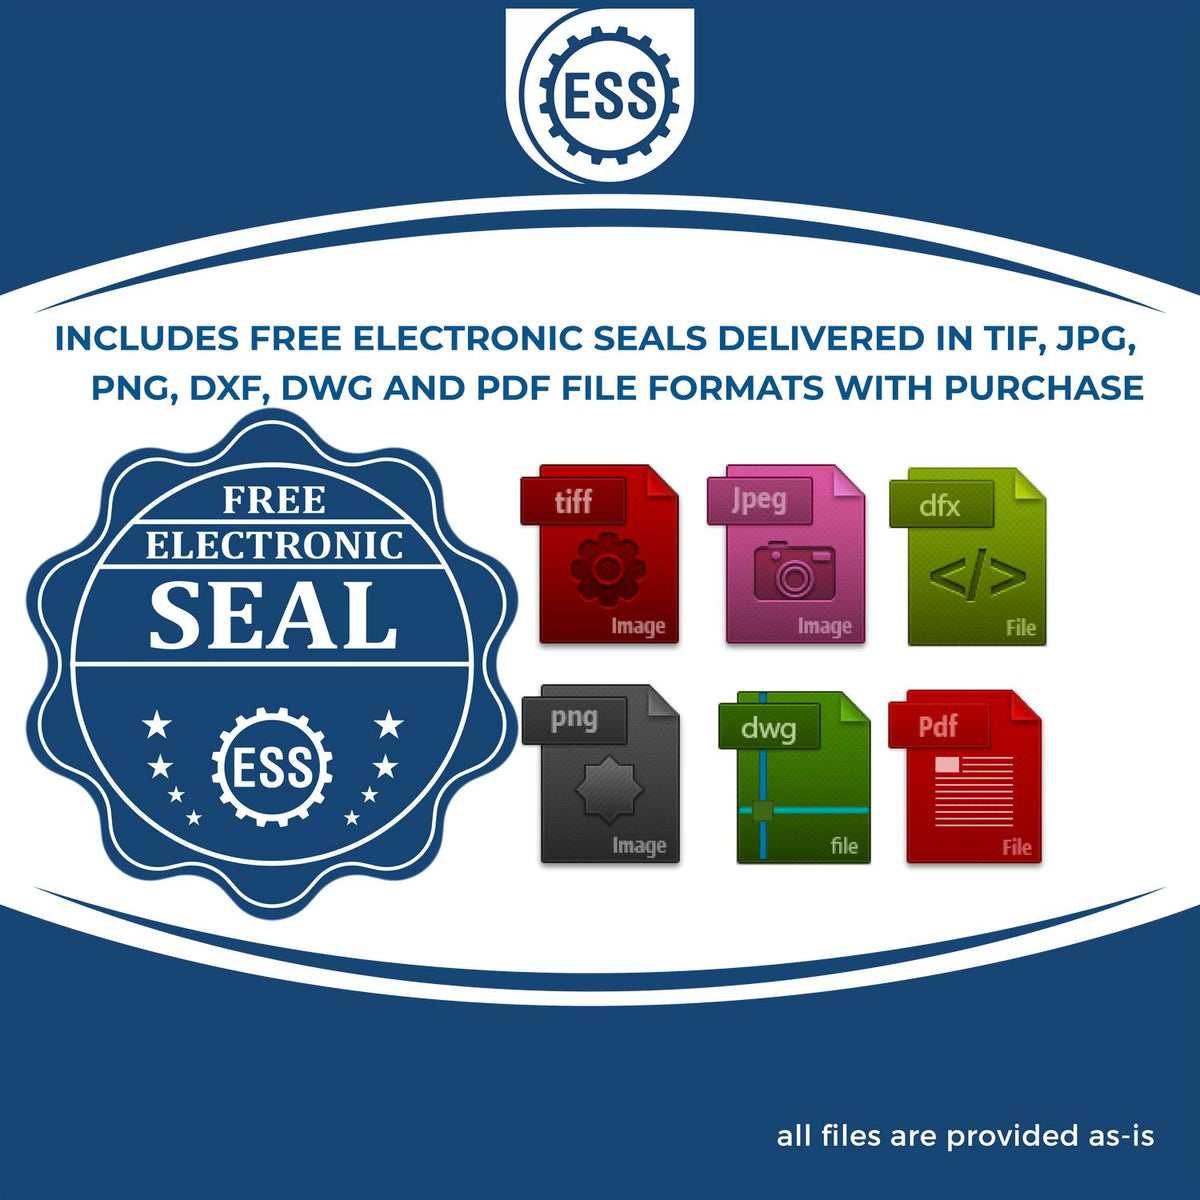 An infographic for the free electronic seal for the Iowa Geologist Desk Seal illustrating the different file type icons such as DXF, DWG, TIF, JPG and PNG.